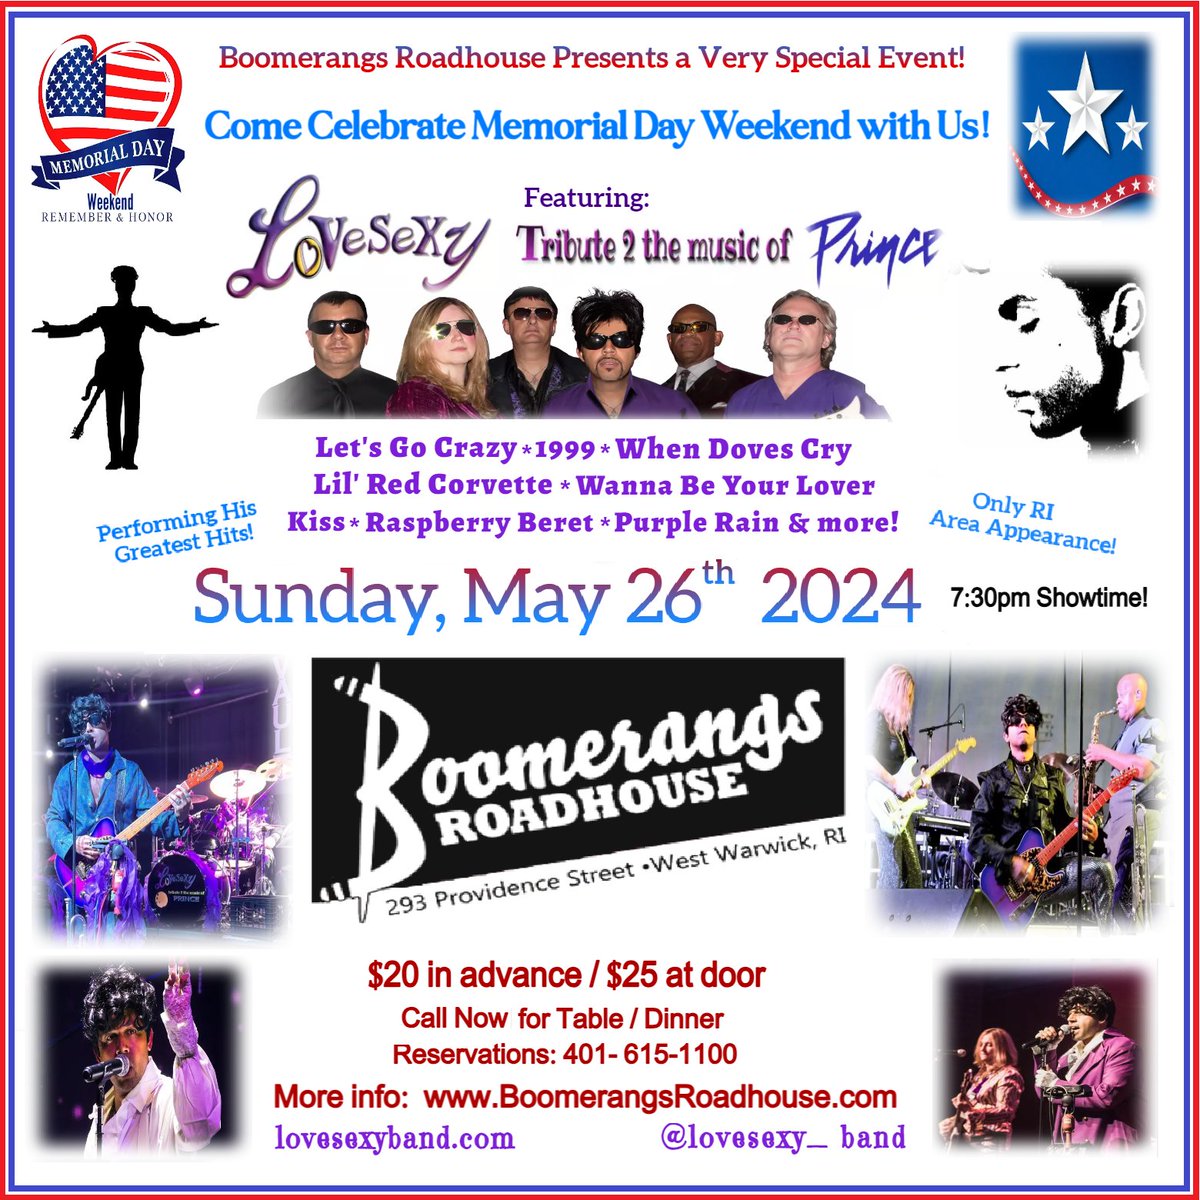 LoVeSeXy tribute 2 Prince appearing Sunday, May 26, 2024 at Boomerangs Roadhouse - W. Warwick, RI. Make Plans Now!  For Adv. Tix & Dinner Reservation info Call (401) 615-1100  #prince #PrinceTribute #memorialdayweekend #RhodeIsland #lovesexyband #lovesexy #boomerangsroadhouse